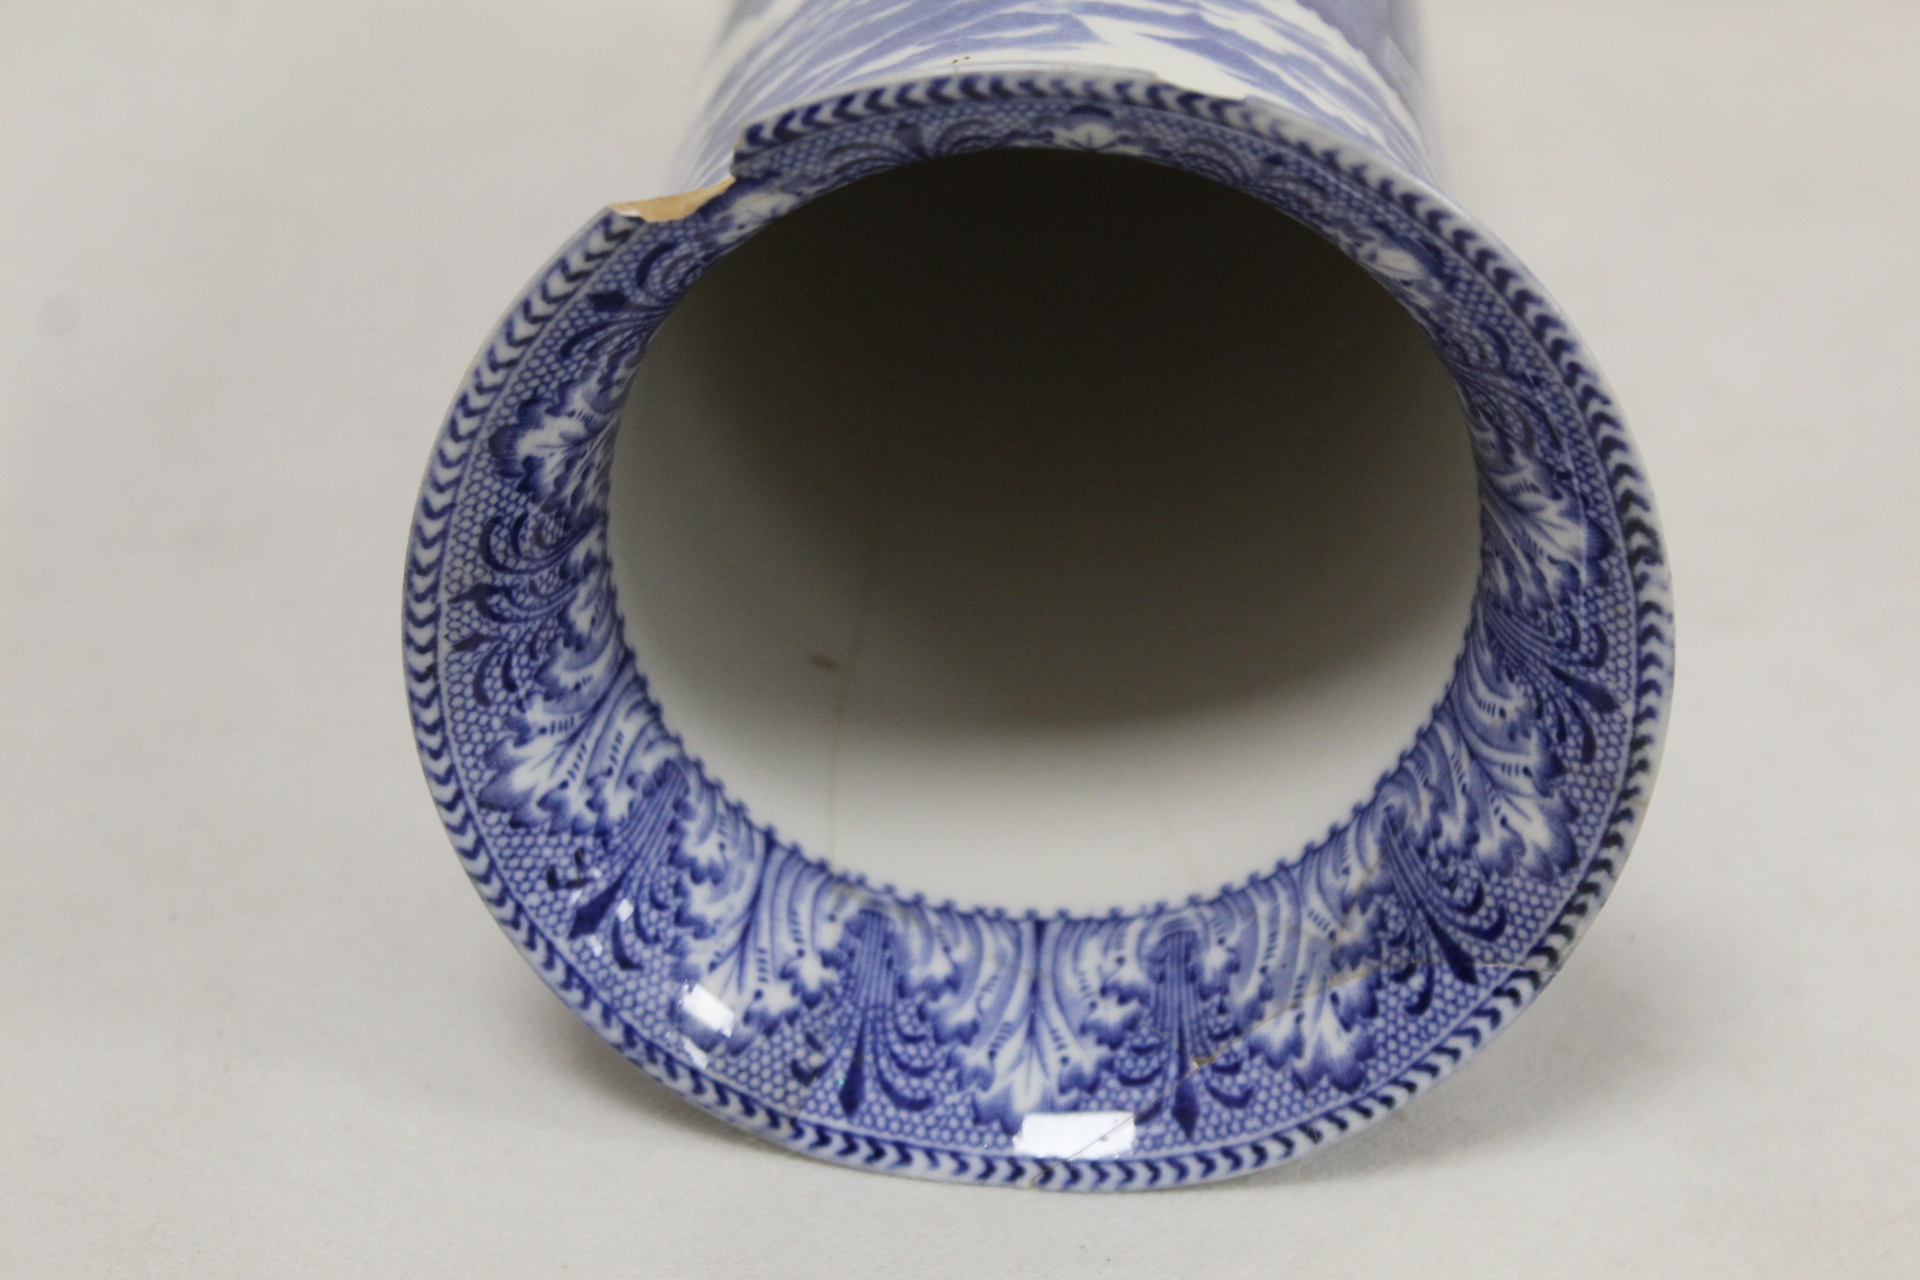 18th century Chinese blue and white porcelain teapot of reeded cylindrical form with entwined - Image 15 of 21